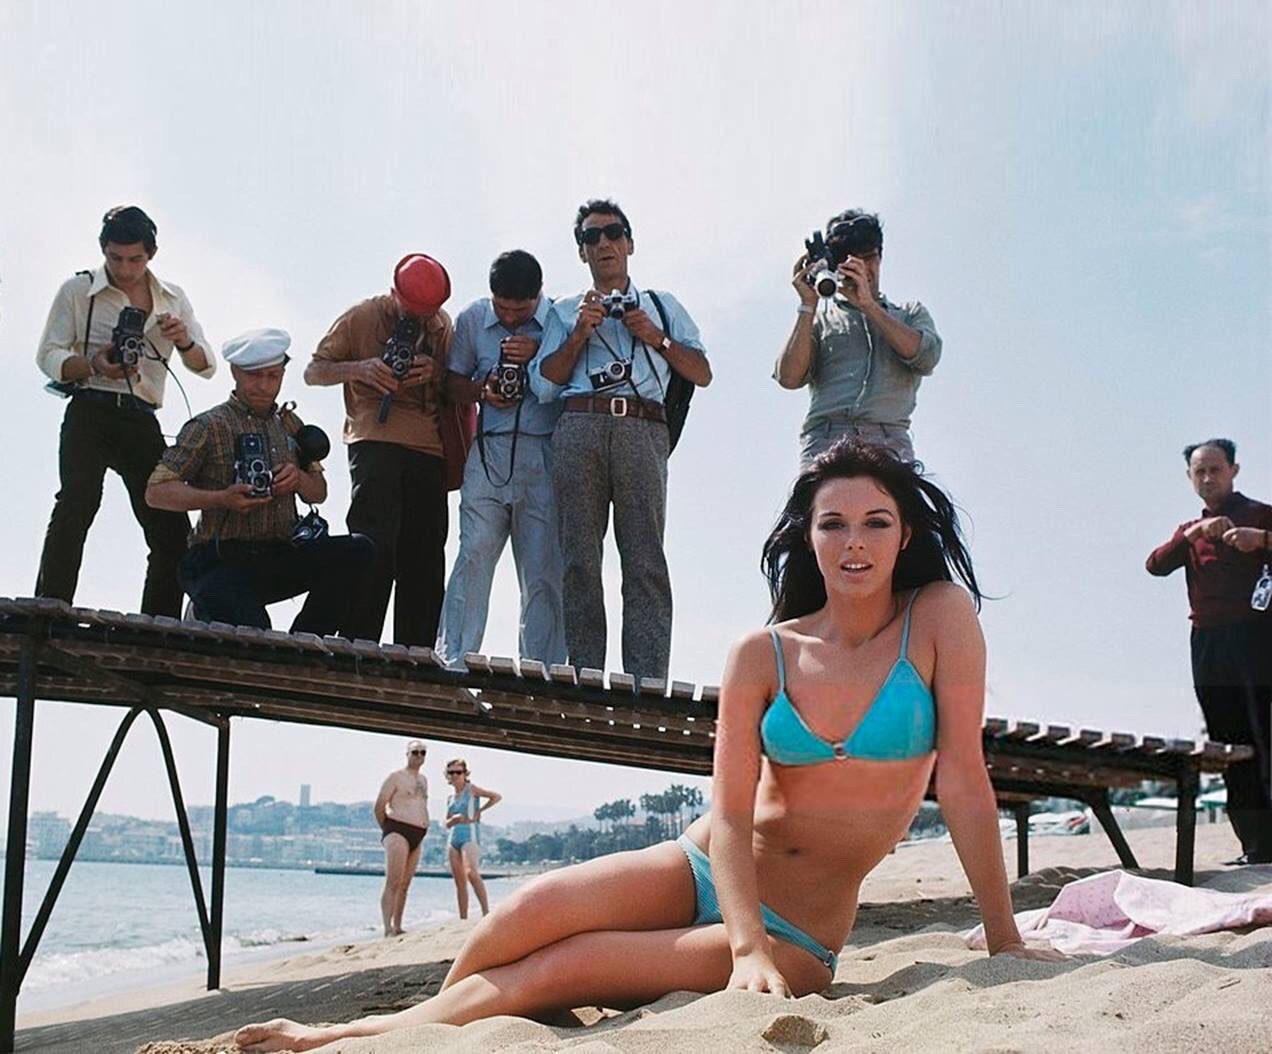 Cannes Film Festival 1968 - Actress Anny Duperey